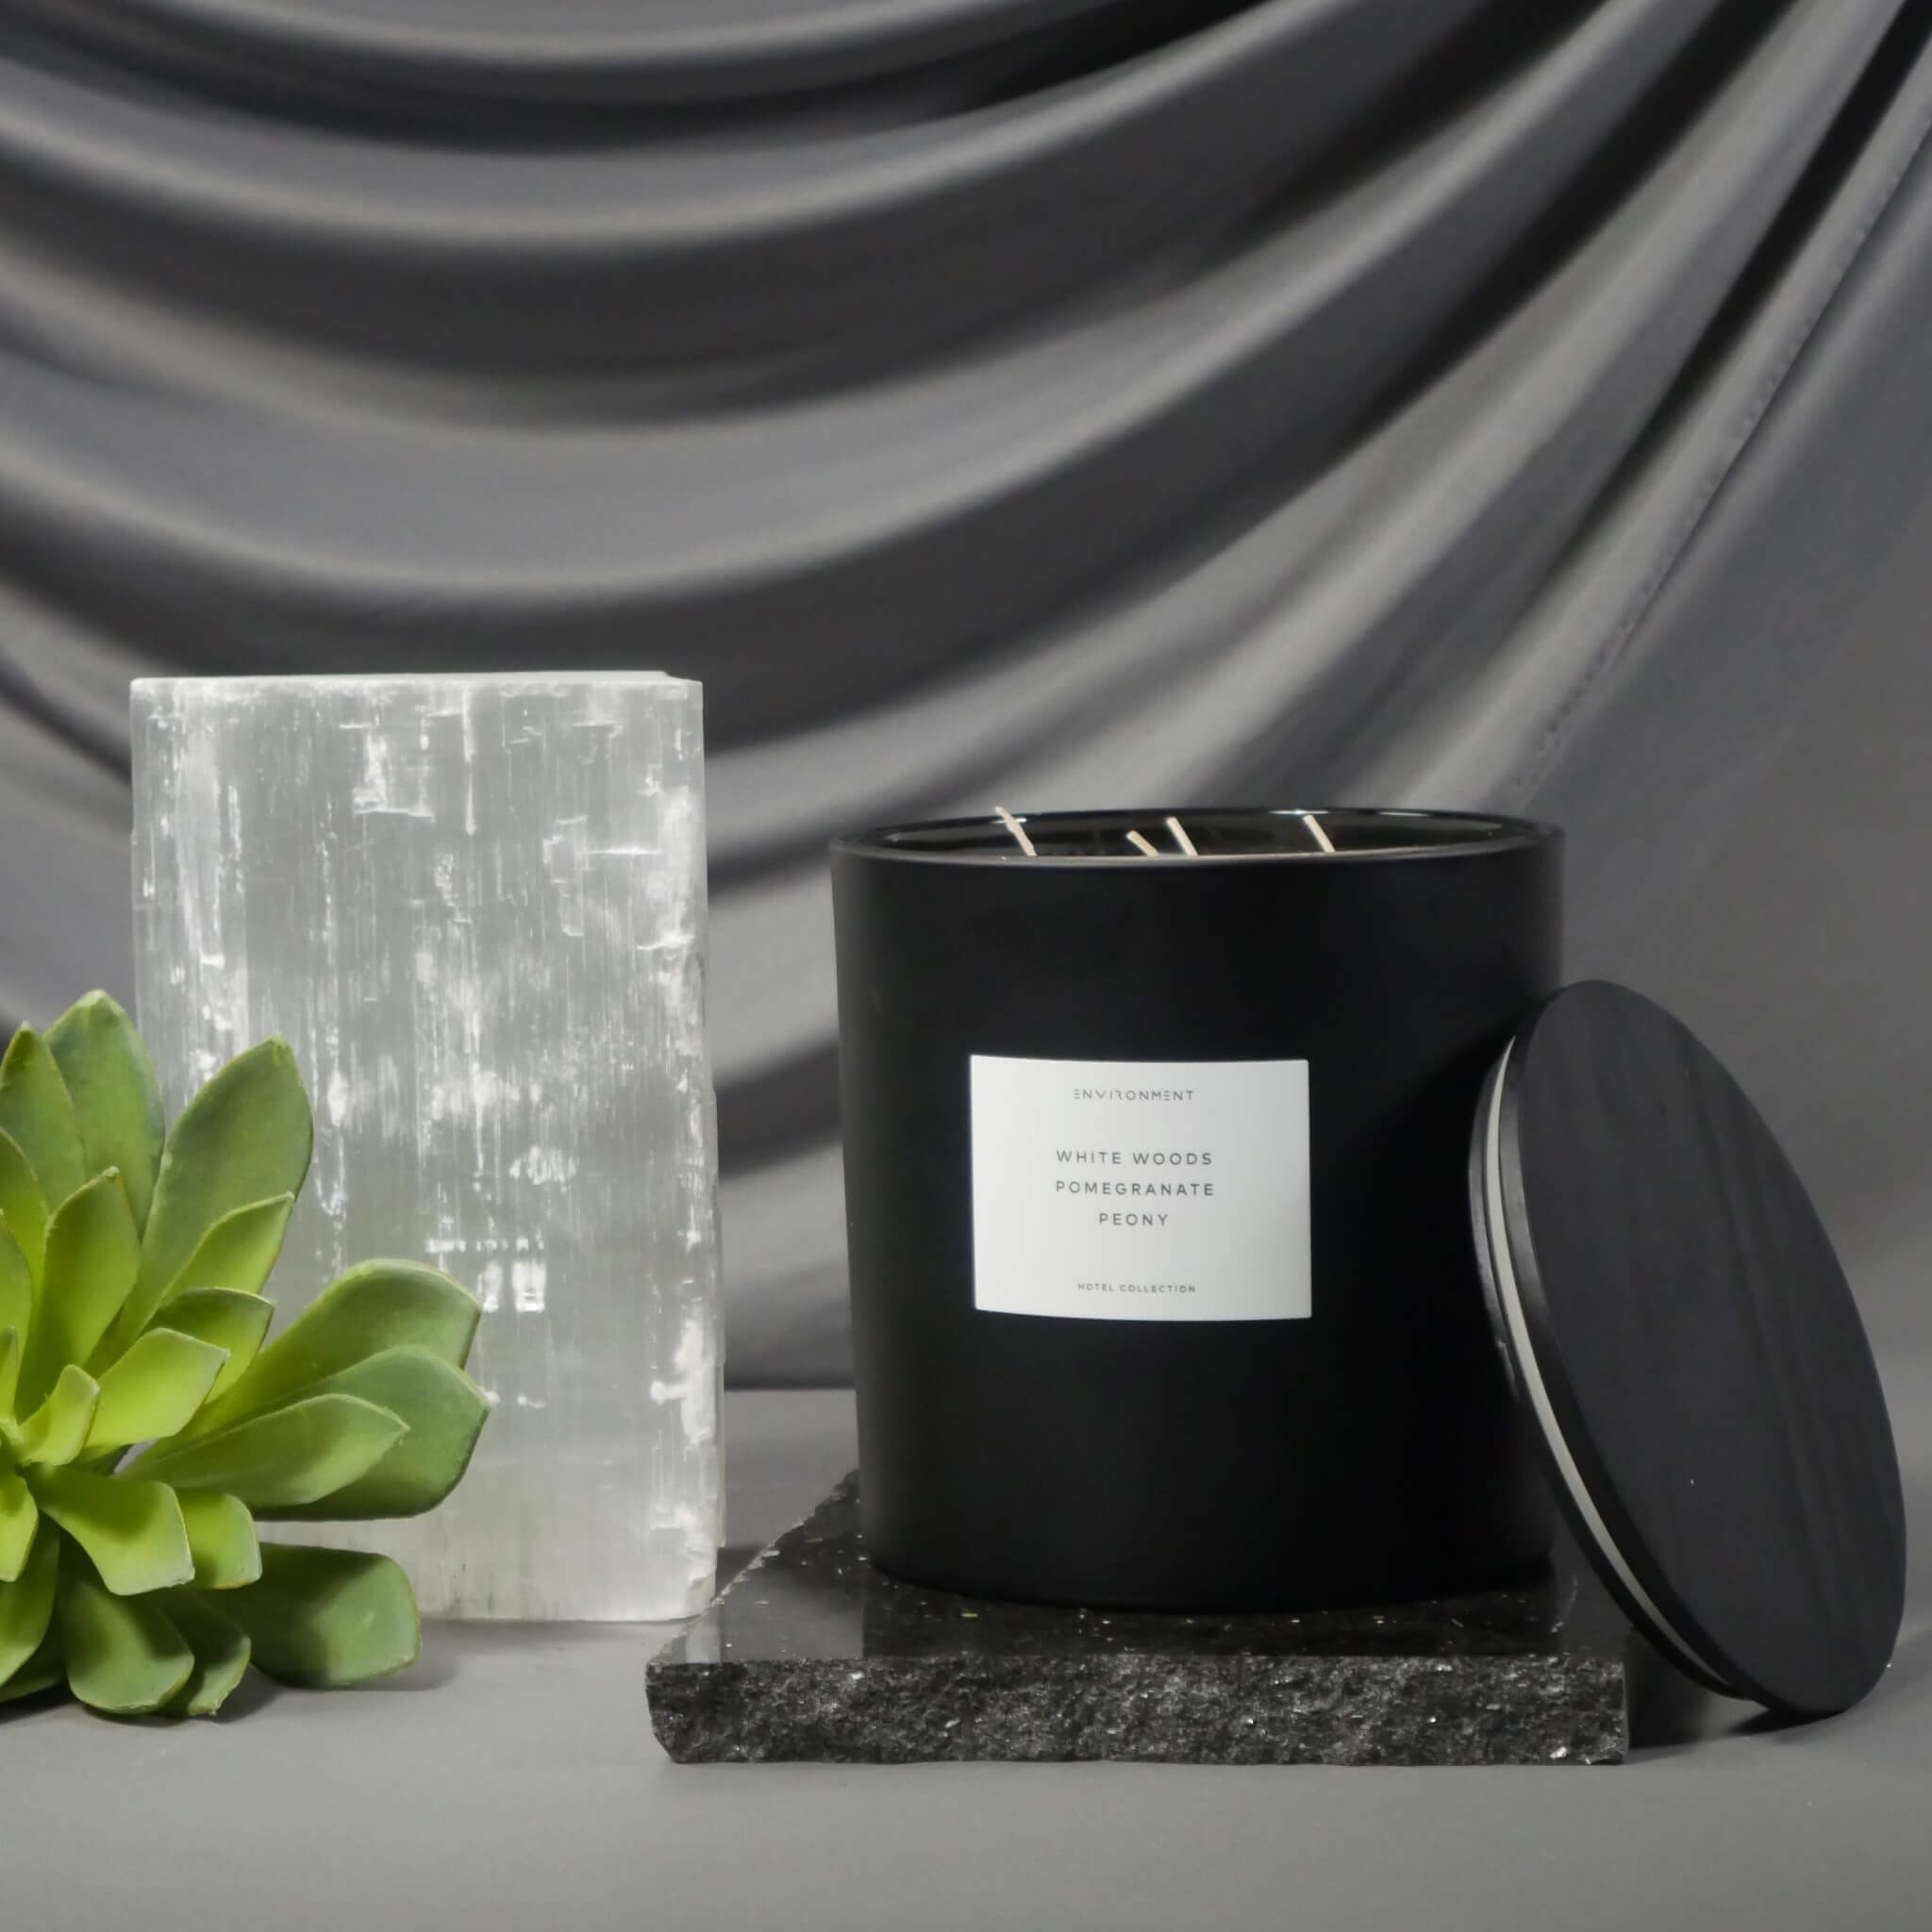 55oz Damask Rose | Vetiver | Guaiac Wood Candle (Inspired by Le Labo Rose 31® and Fairmont Hotel®)